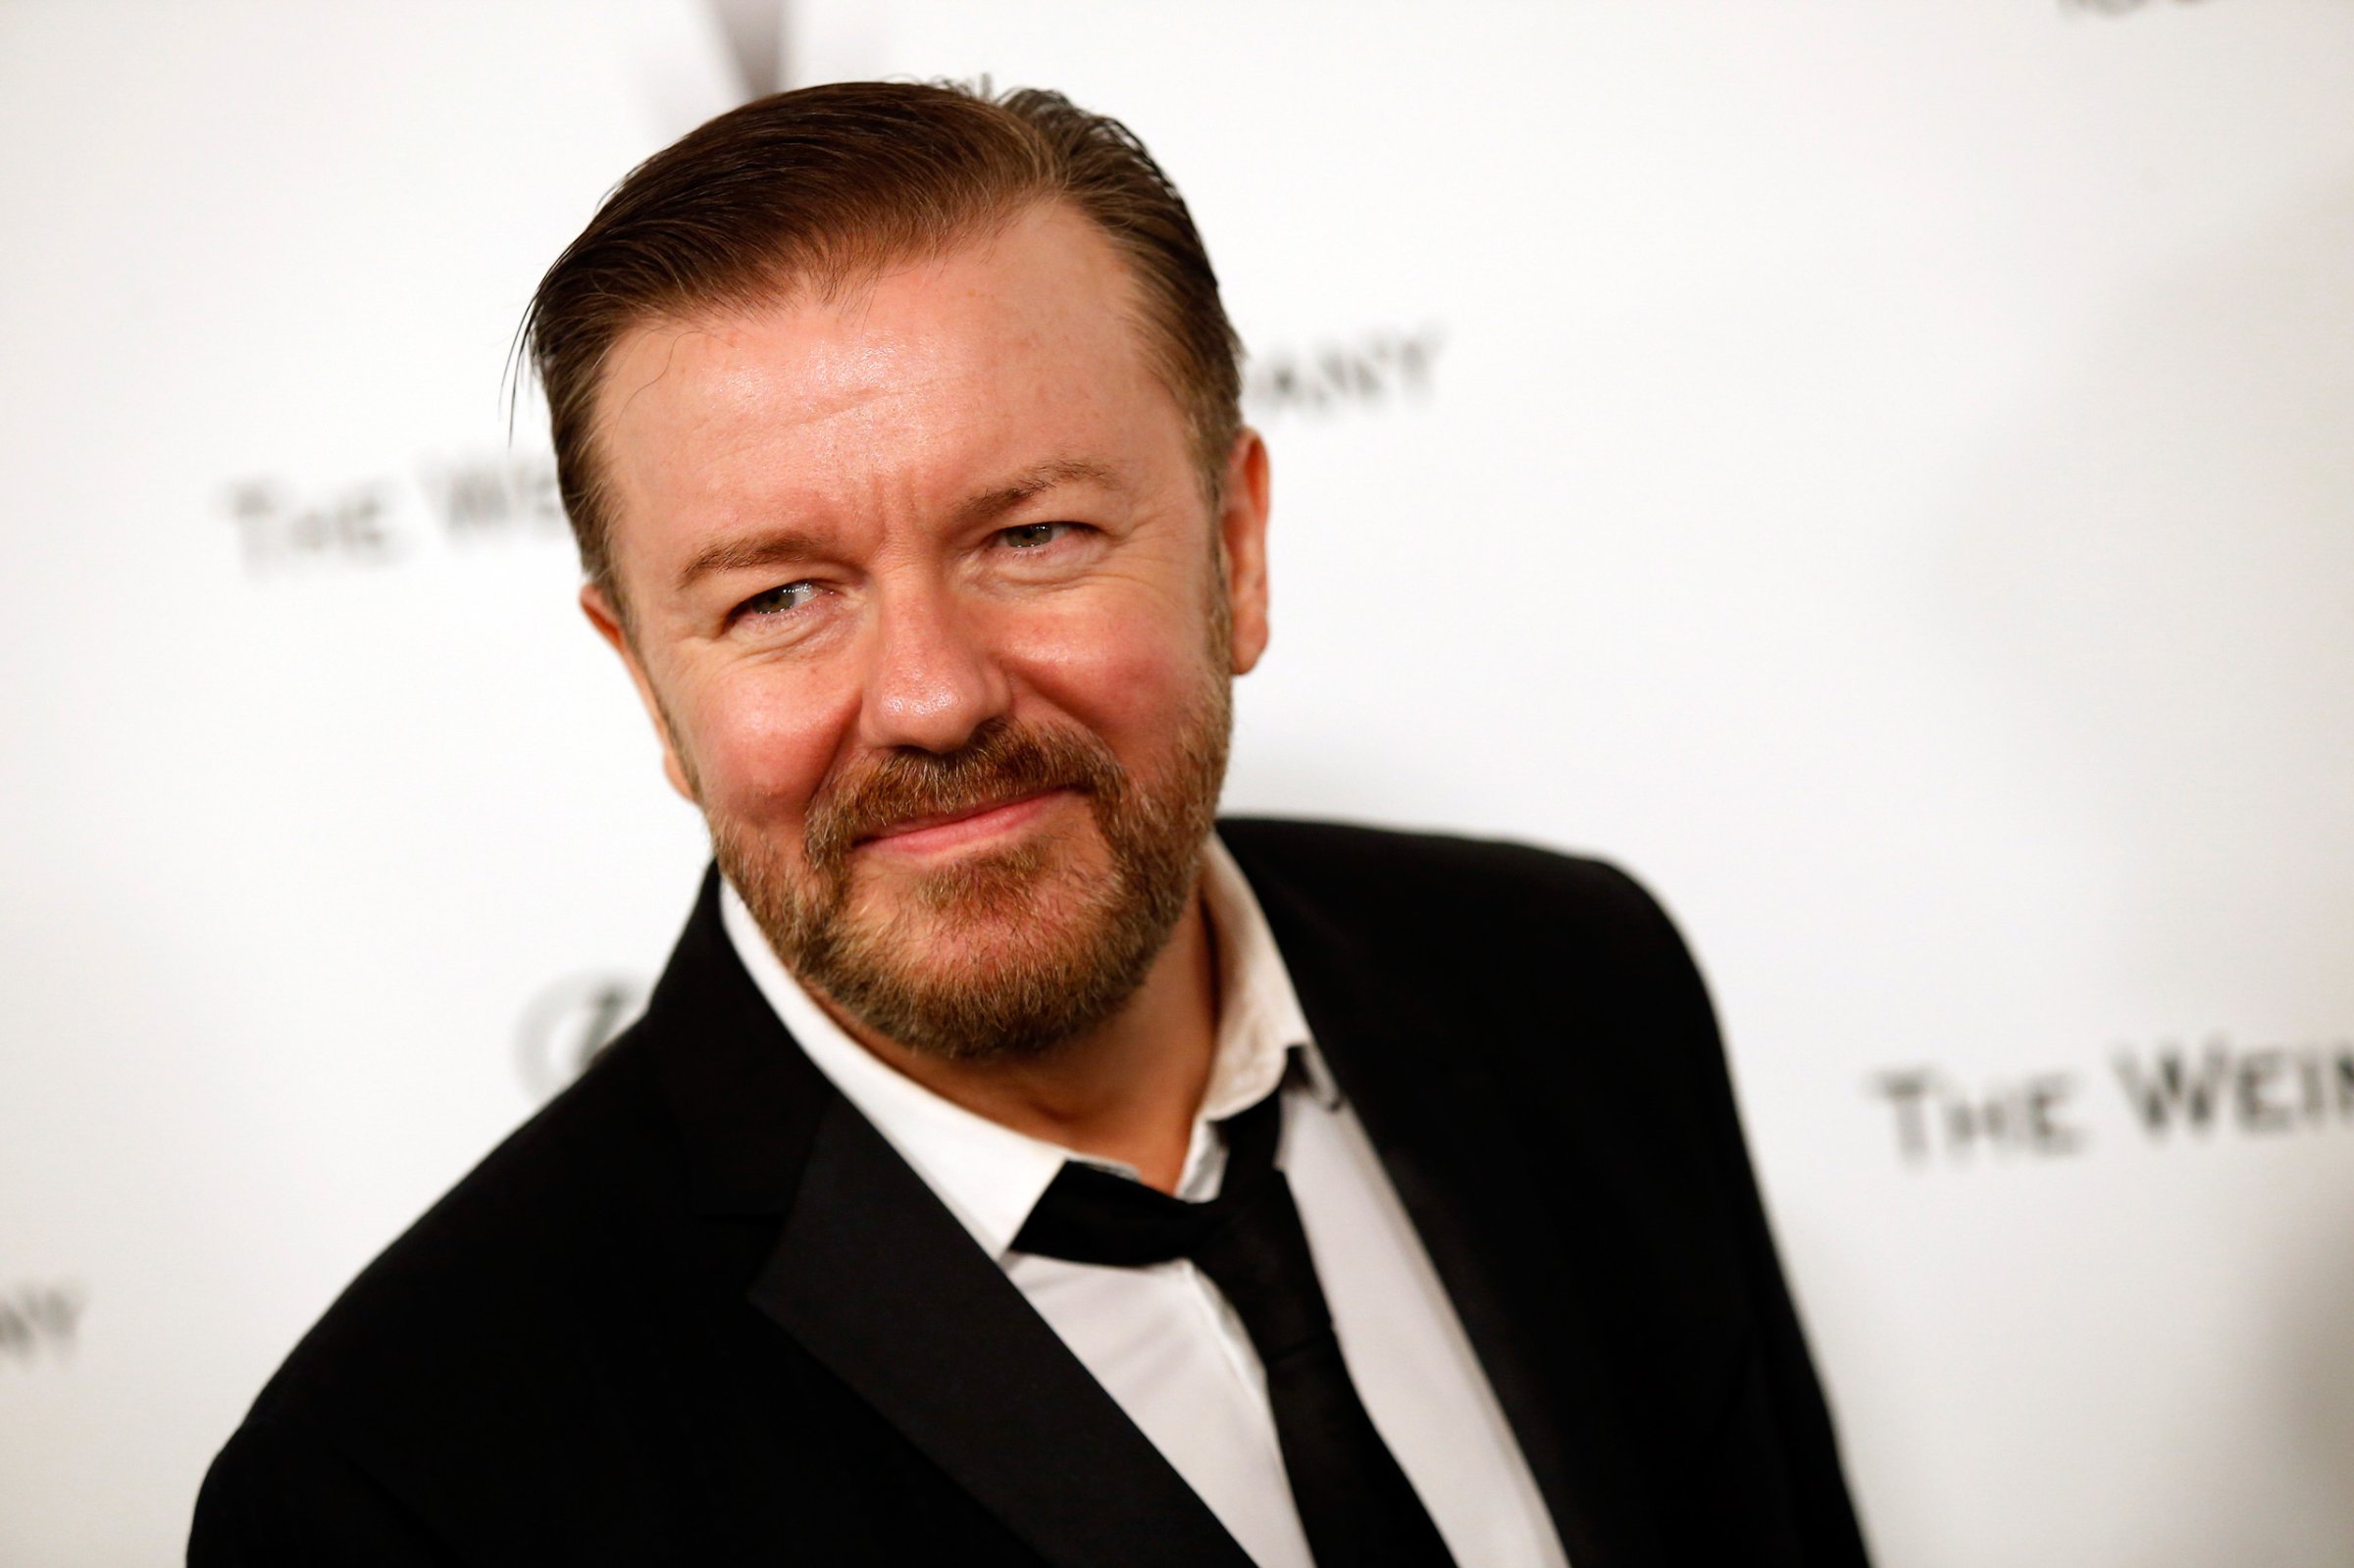 Actor Ricky Gervais arrives at the Weinstein Netflix after party after the 72nd annual Golden Globe Awards in Beverly Hills